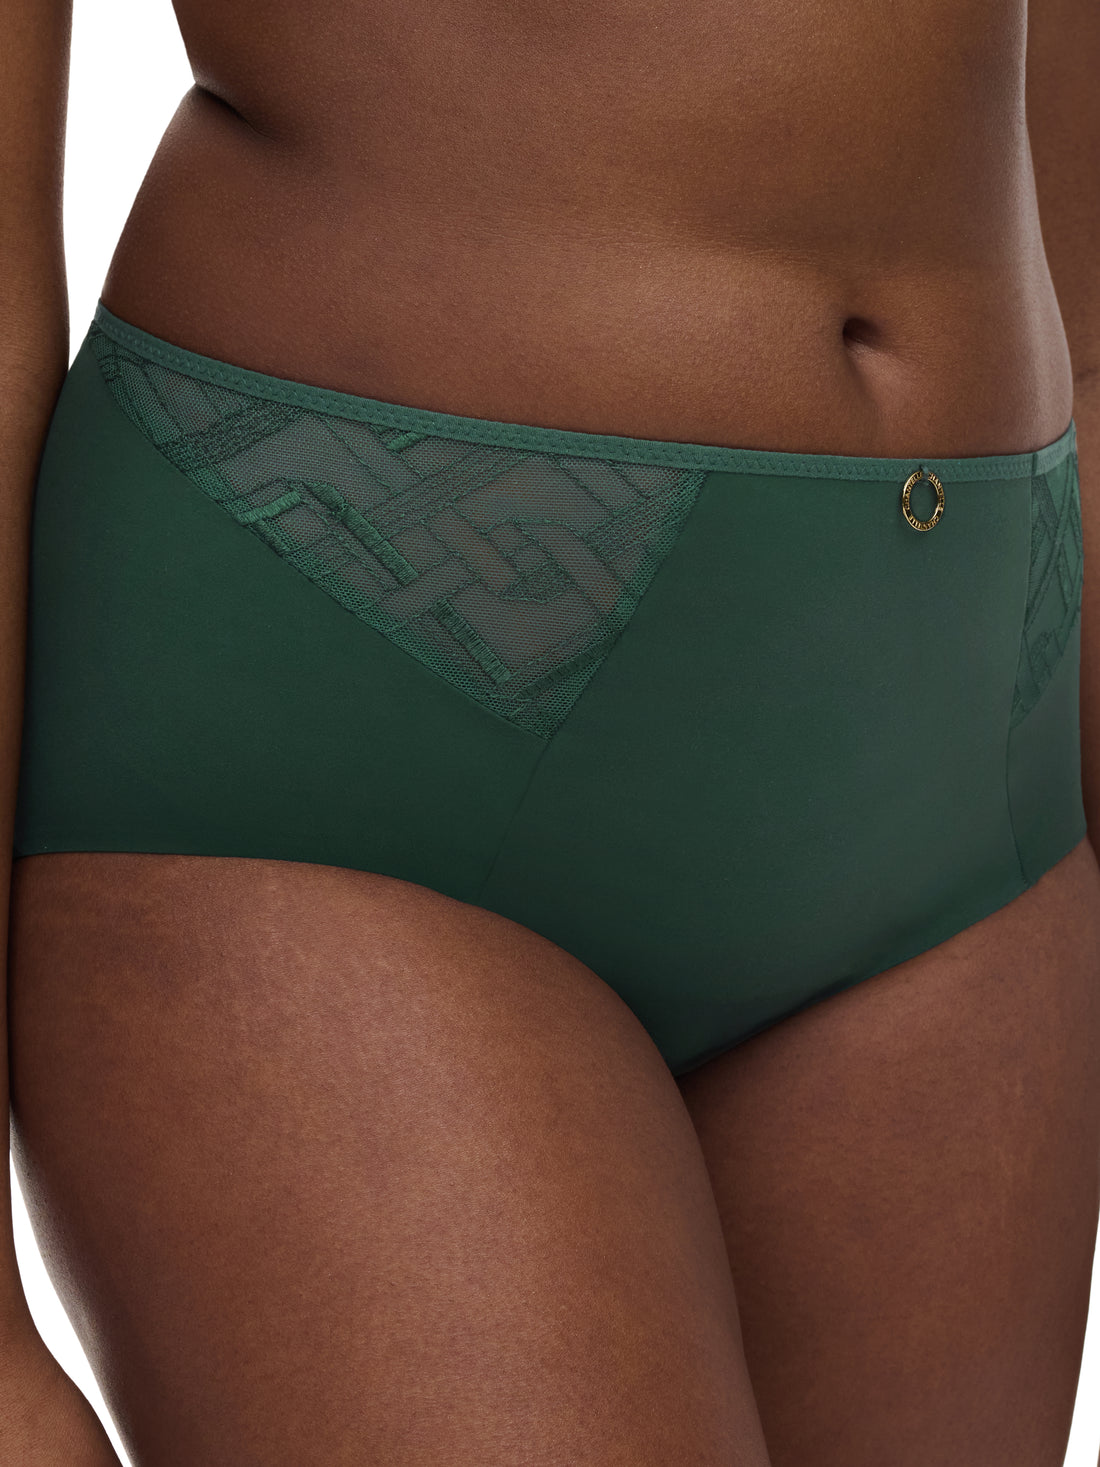 Chantelle - Graphic Support High Waisted Full Support Brief in Green